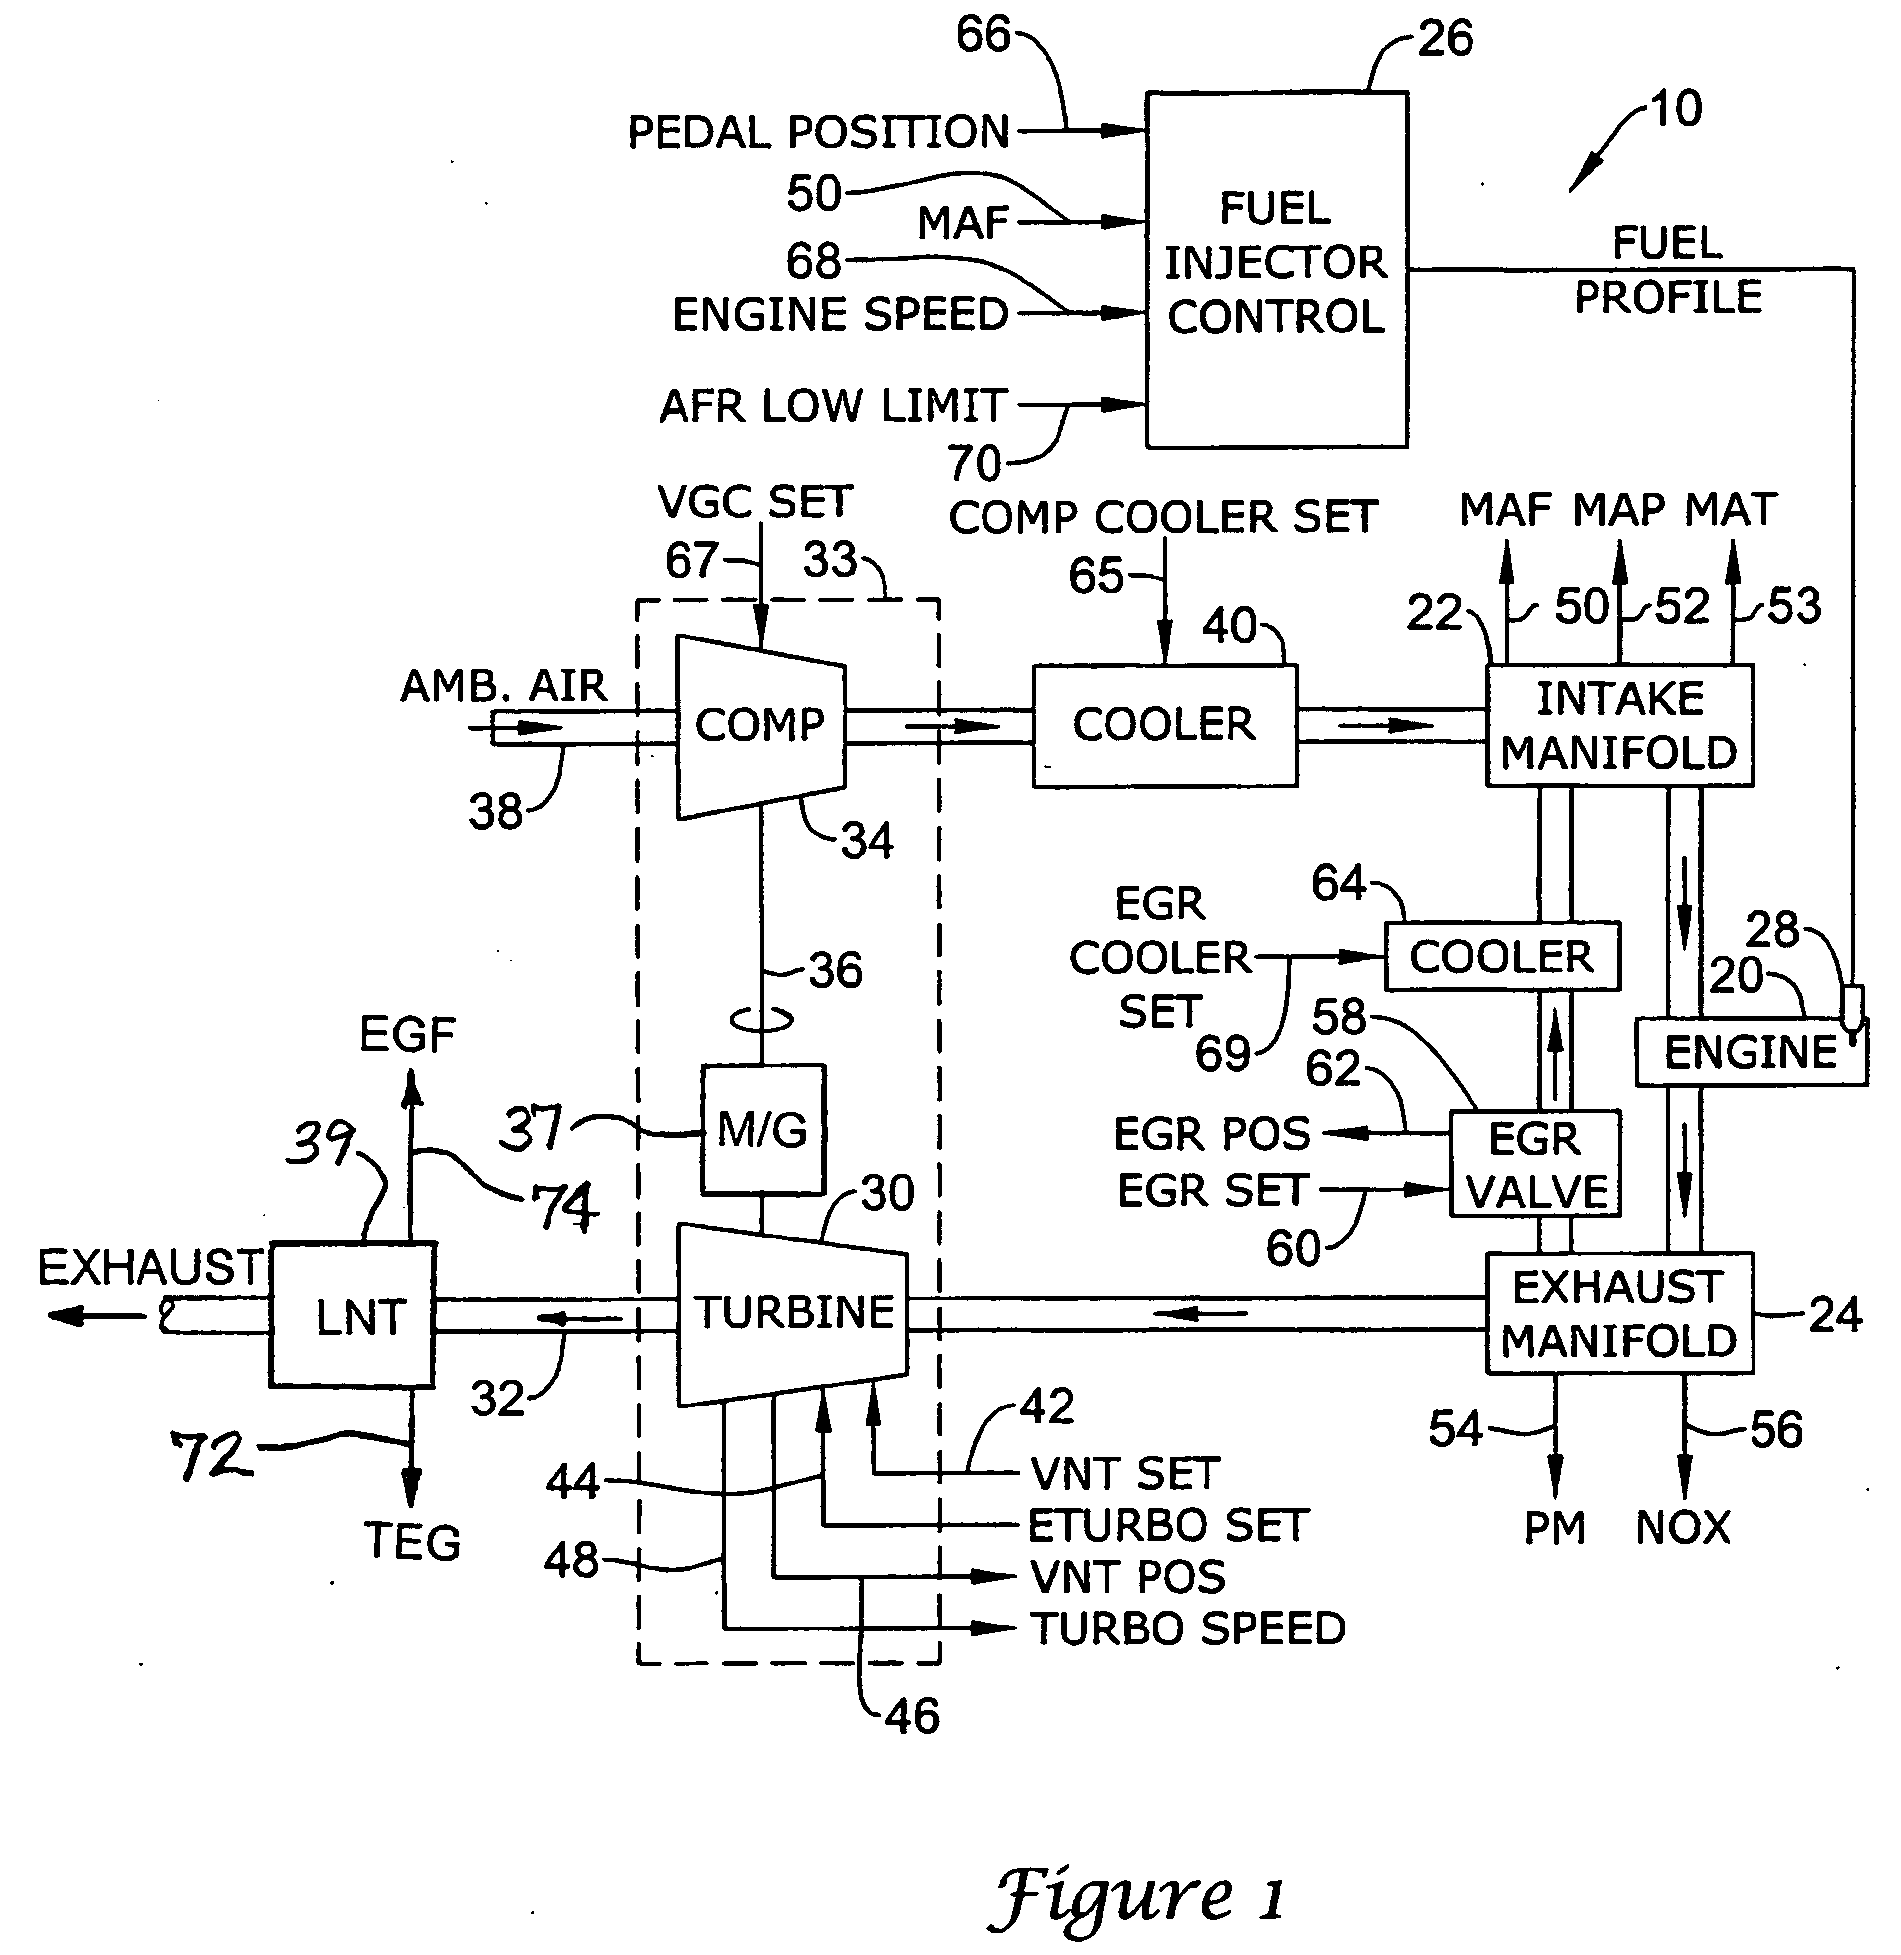 Control of exhaust temperature for after-treatment process in an e-turbo system